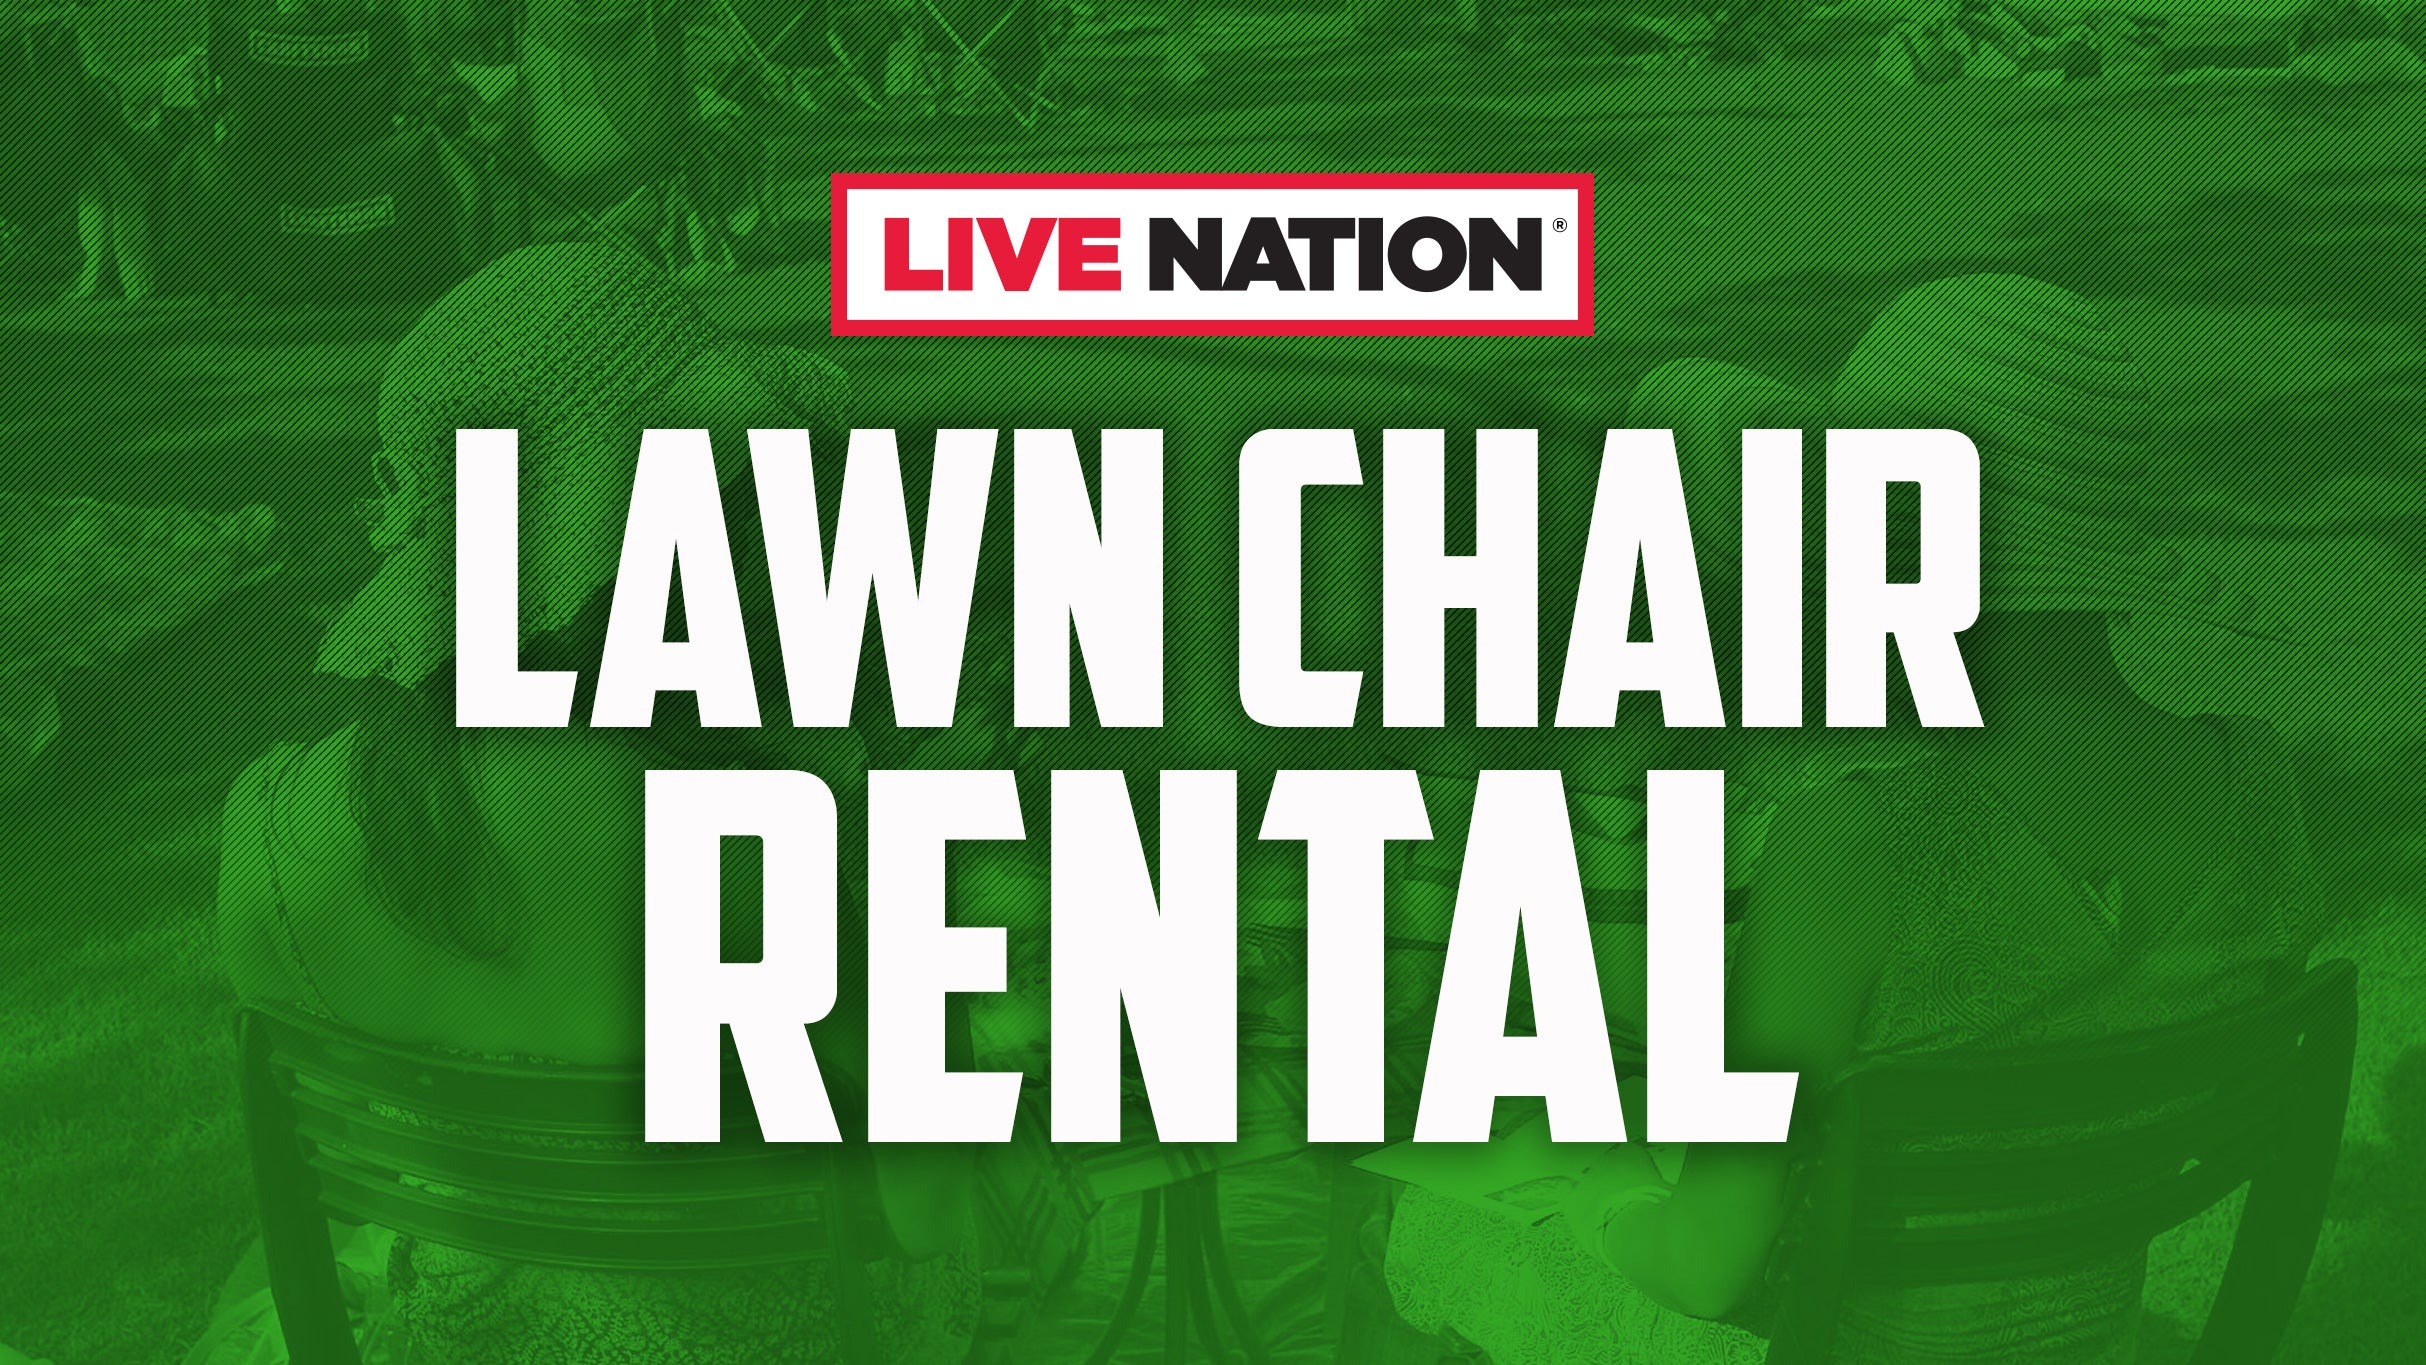 Ticket Reselling Lawn Chair Rental - Queens of the Stone Age (NOT A CONCERT TICKET)